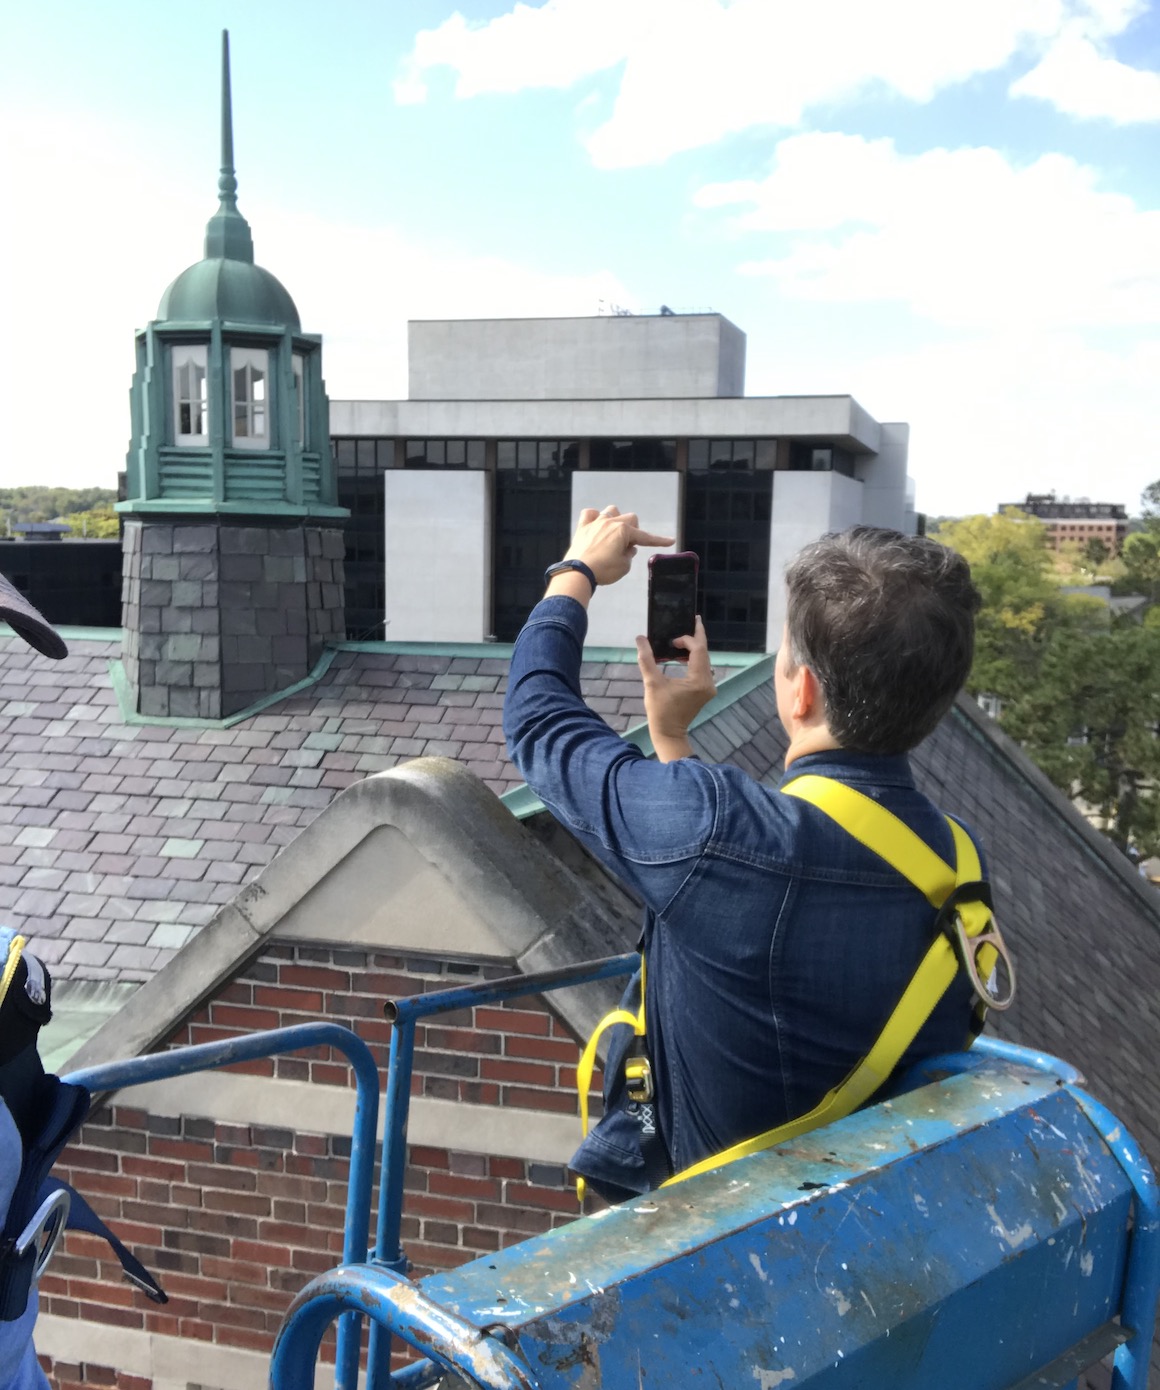 General Manager Kathy Ciesinski photographs the slate tiles from a cherry-picker prior to roof renovations. 